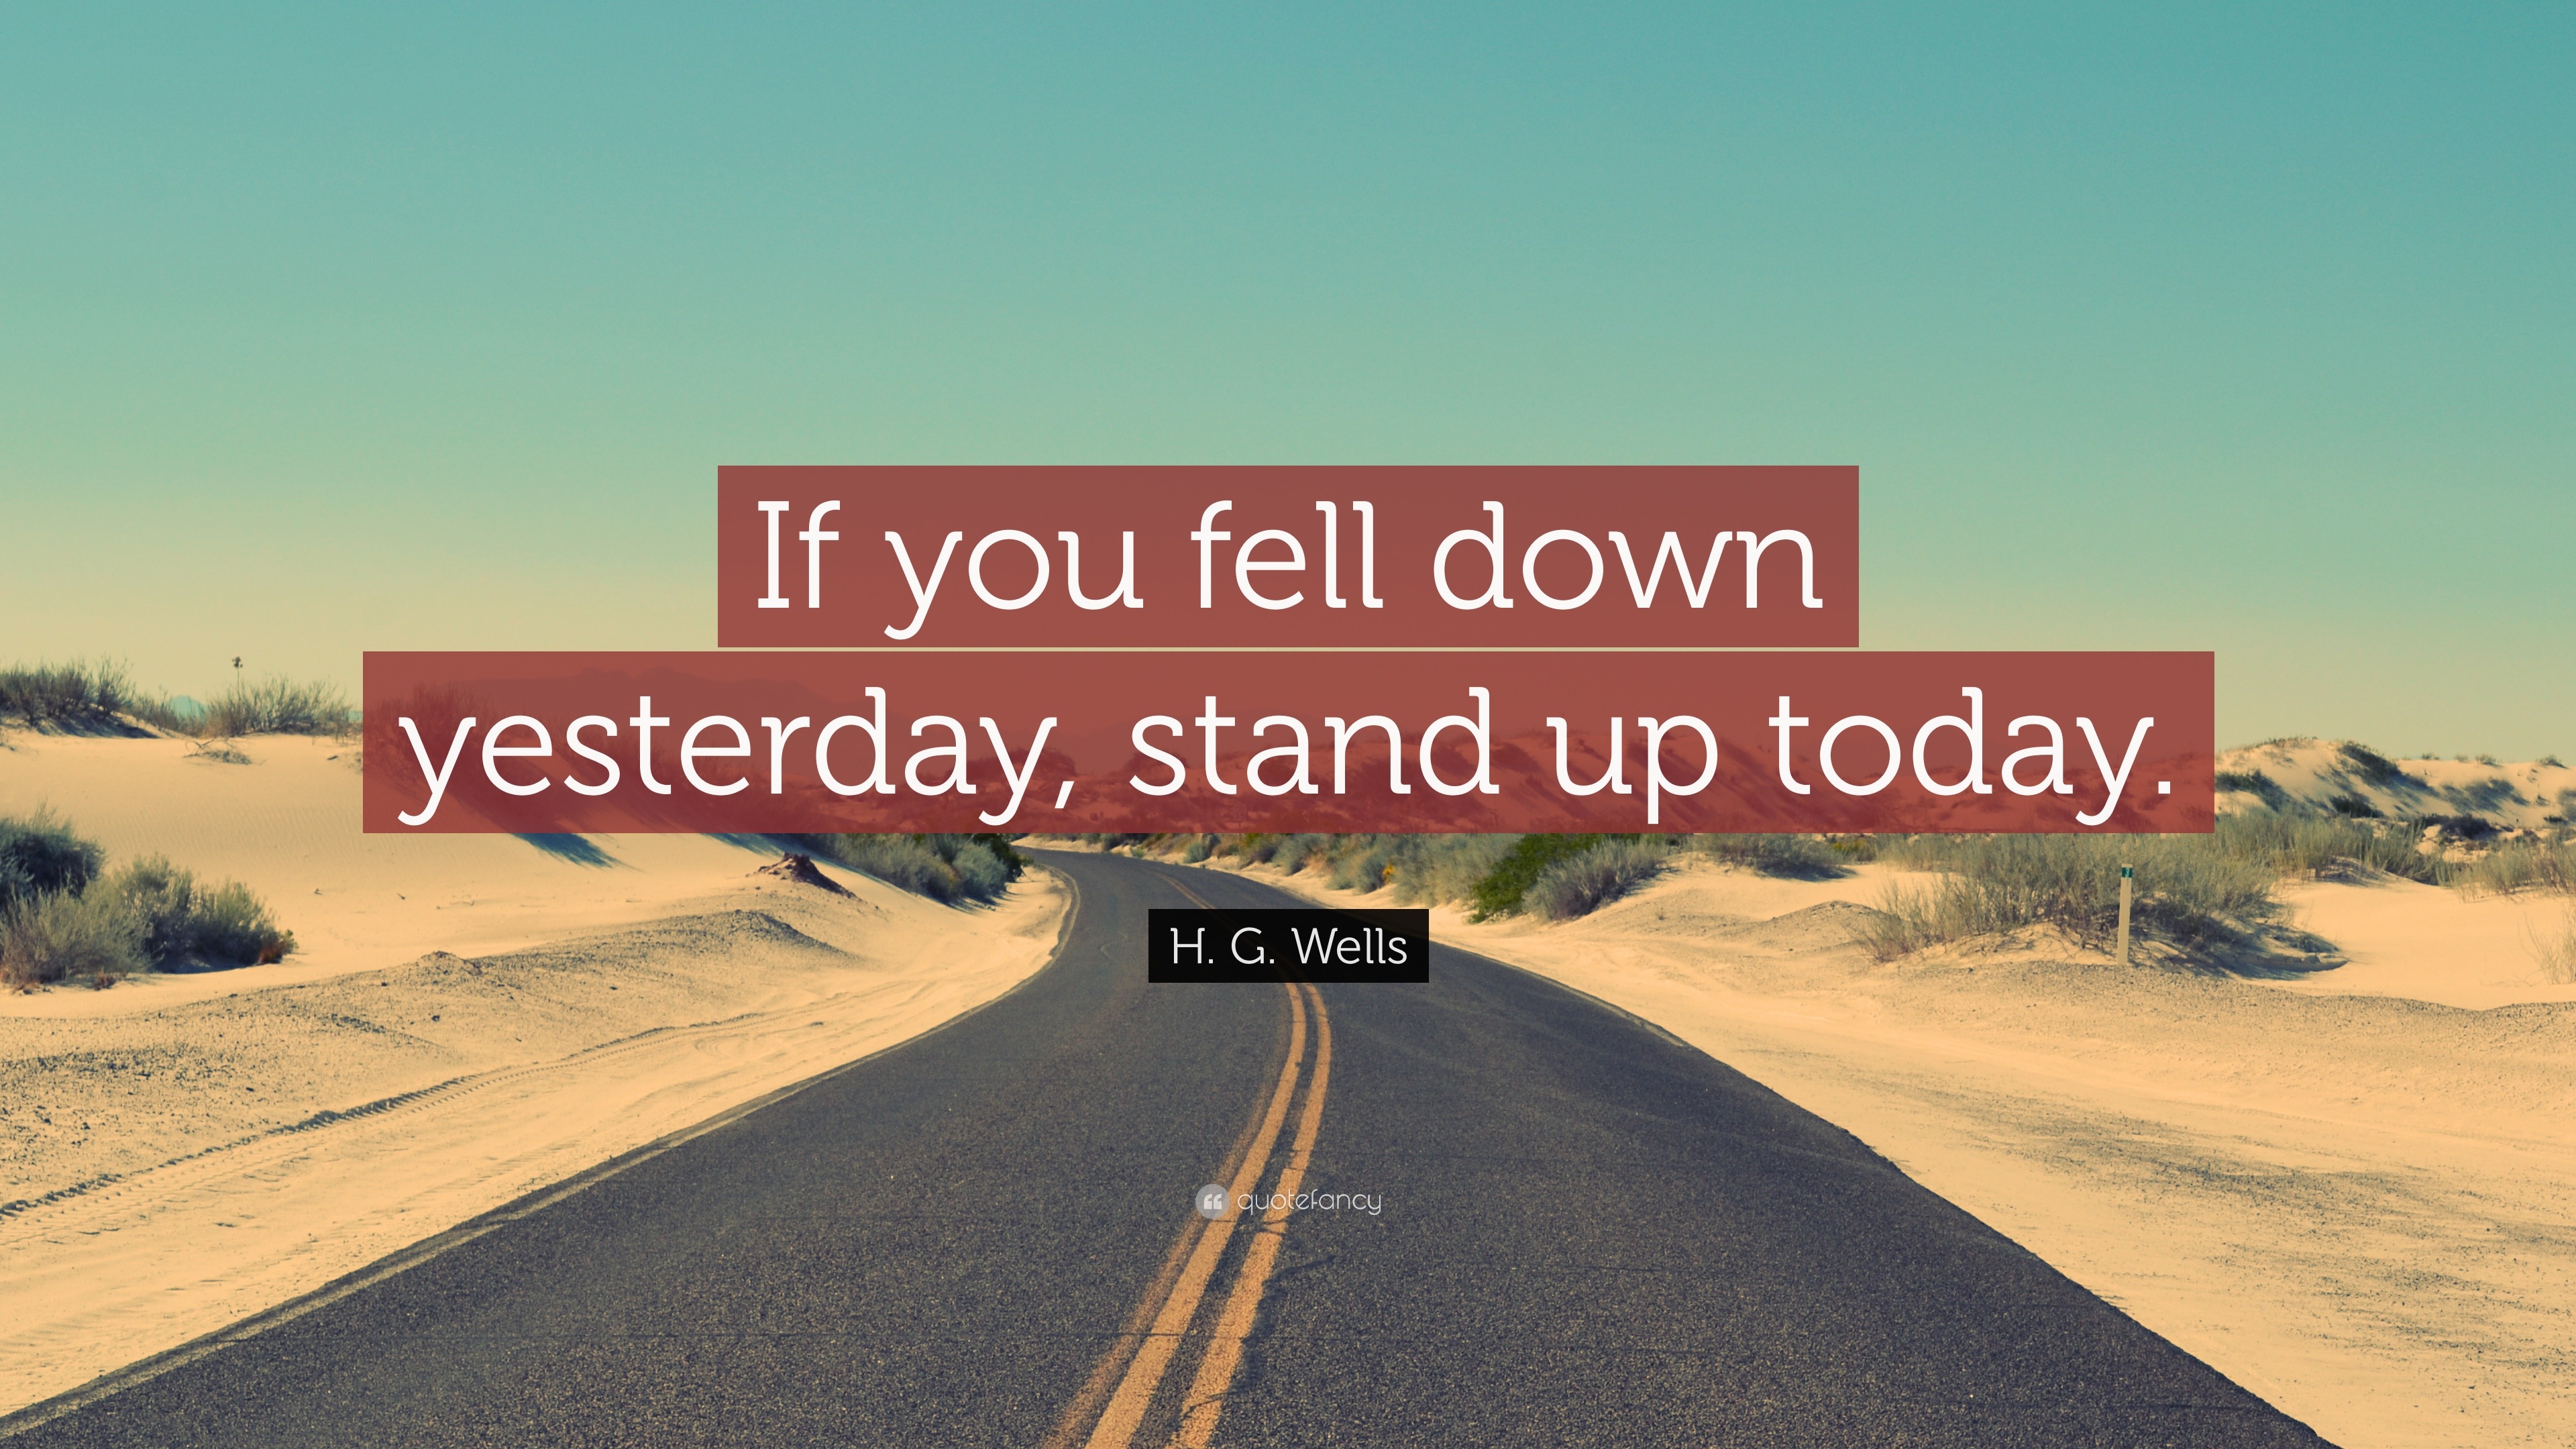 49506 H G Wells Quote If you fell down yesterday stand up today